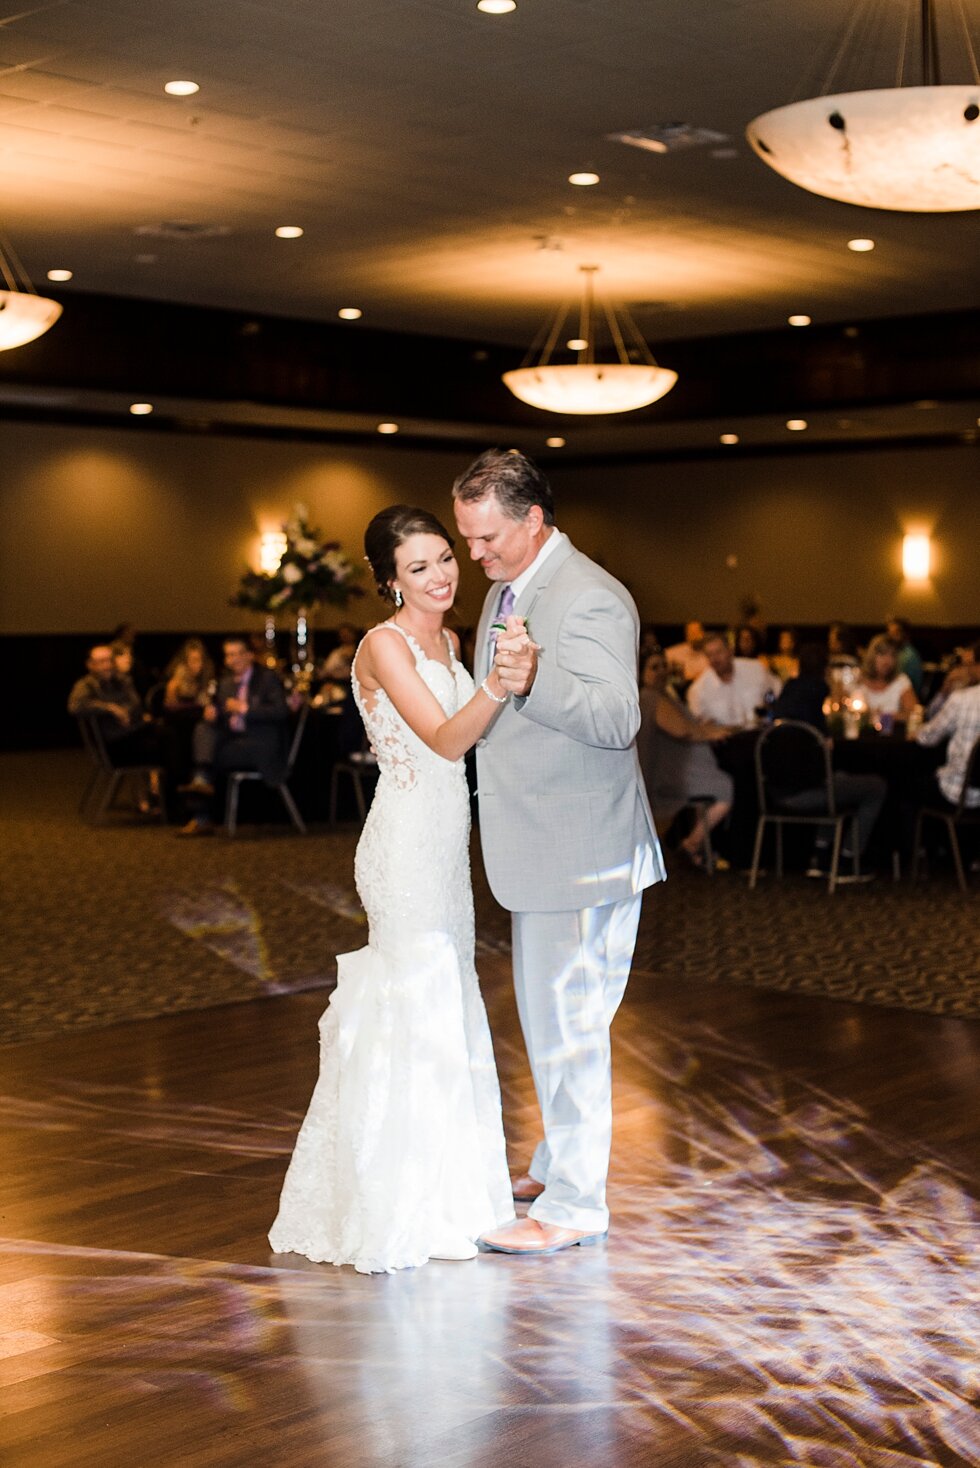  Father and daughter dancing together at the wedding reception. wedding ceremony details stunning photography married midwest louisville kentucky #weddingphoto #love #justmarried #midwestphotographer #kywedding #louisville #kentuckywedding #auburnkyw